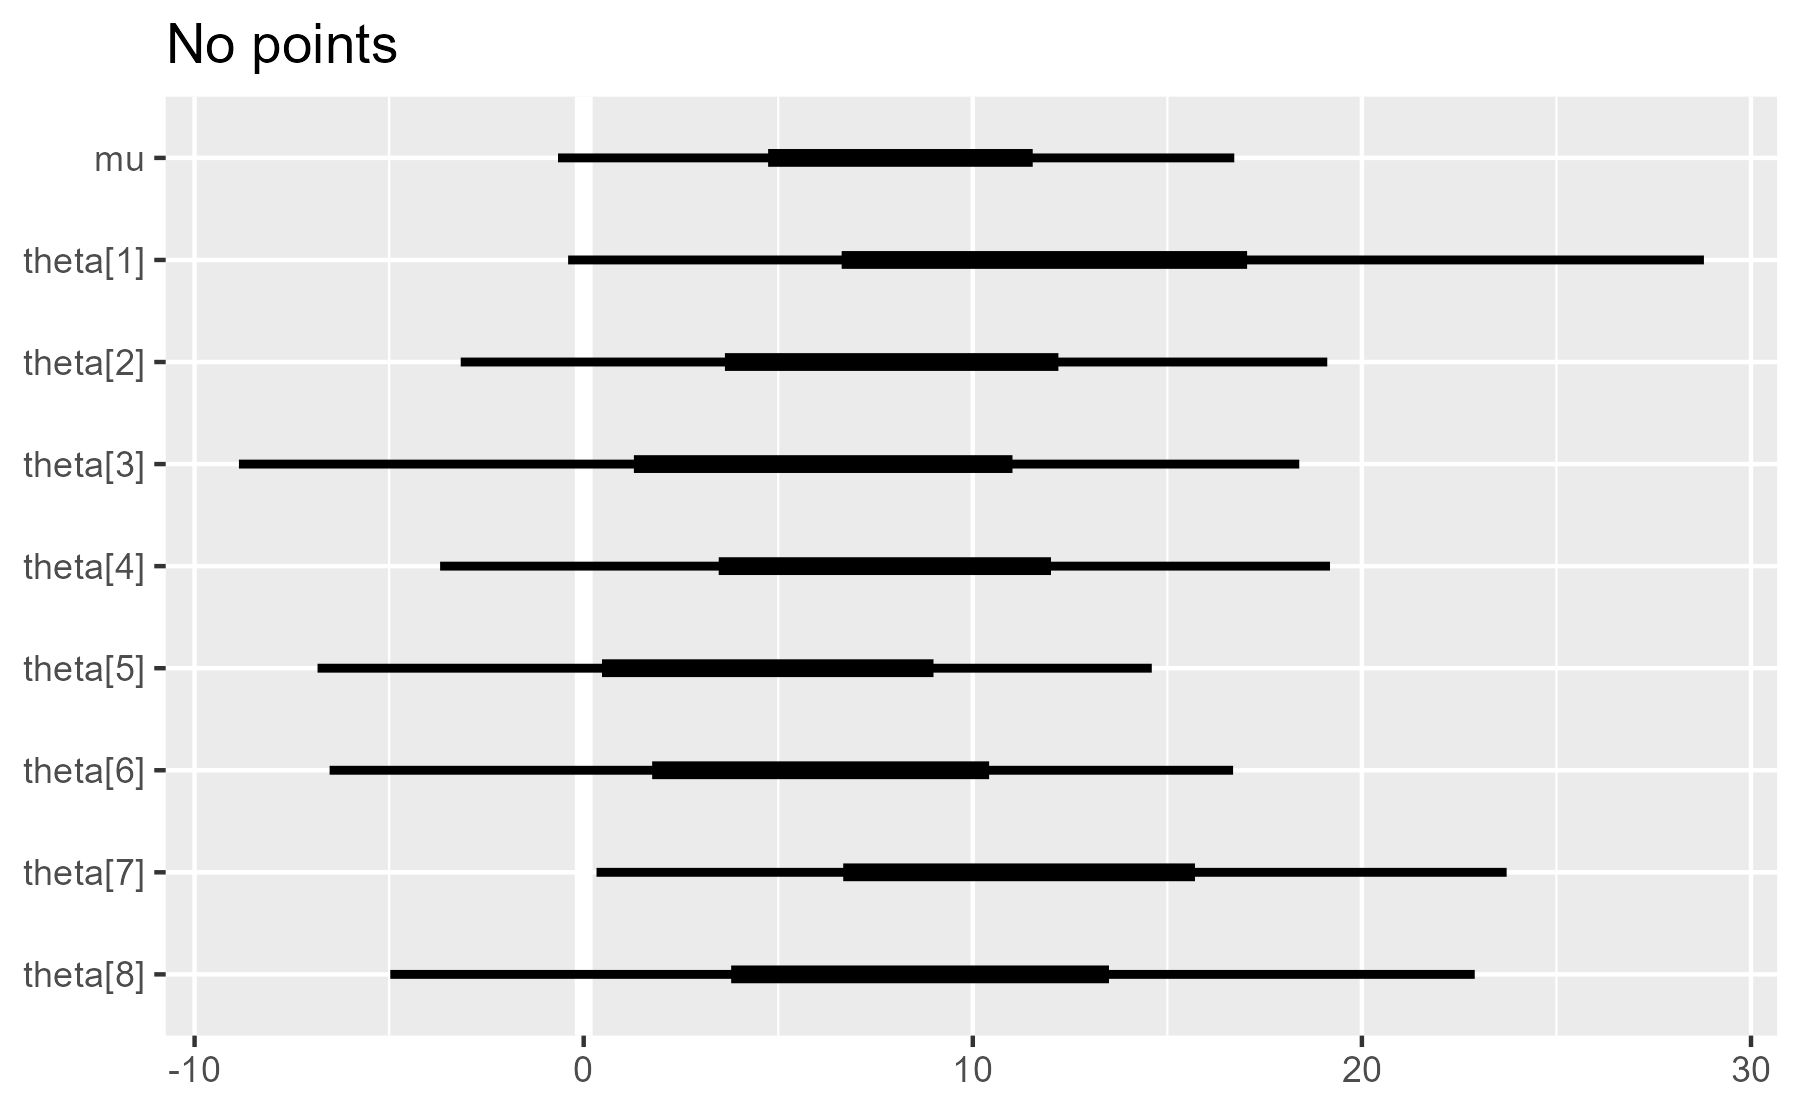 A test of the plot_intervals() function